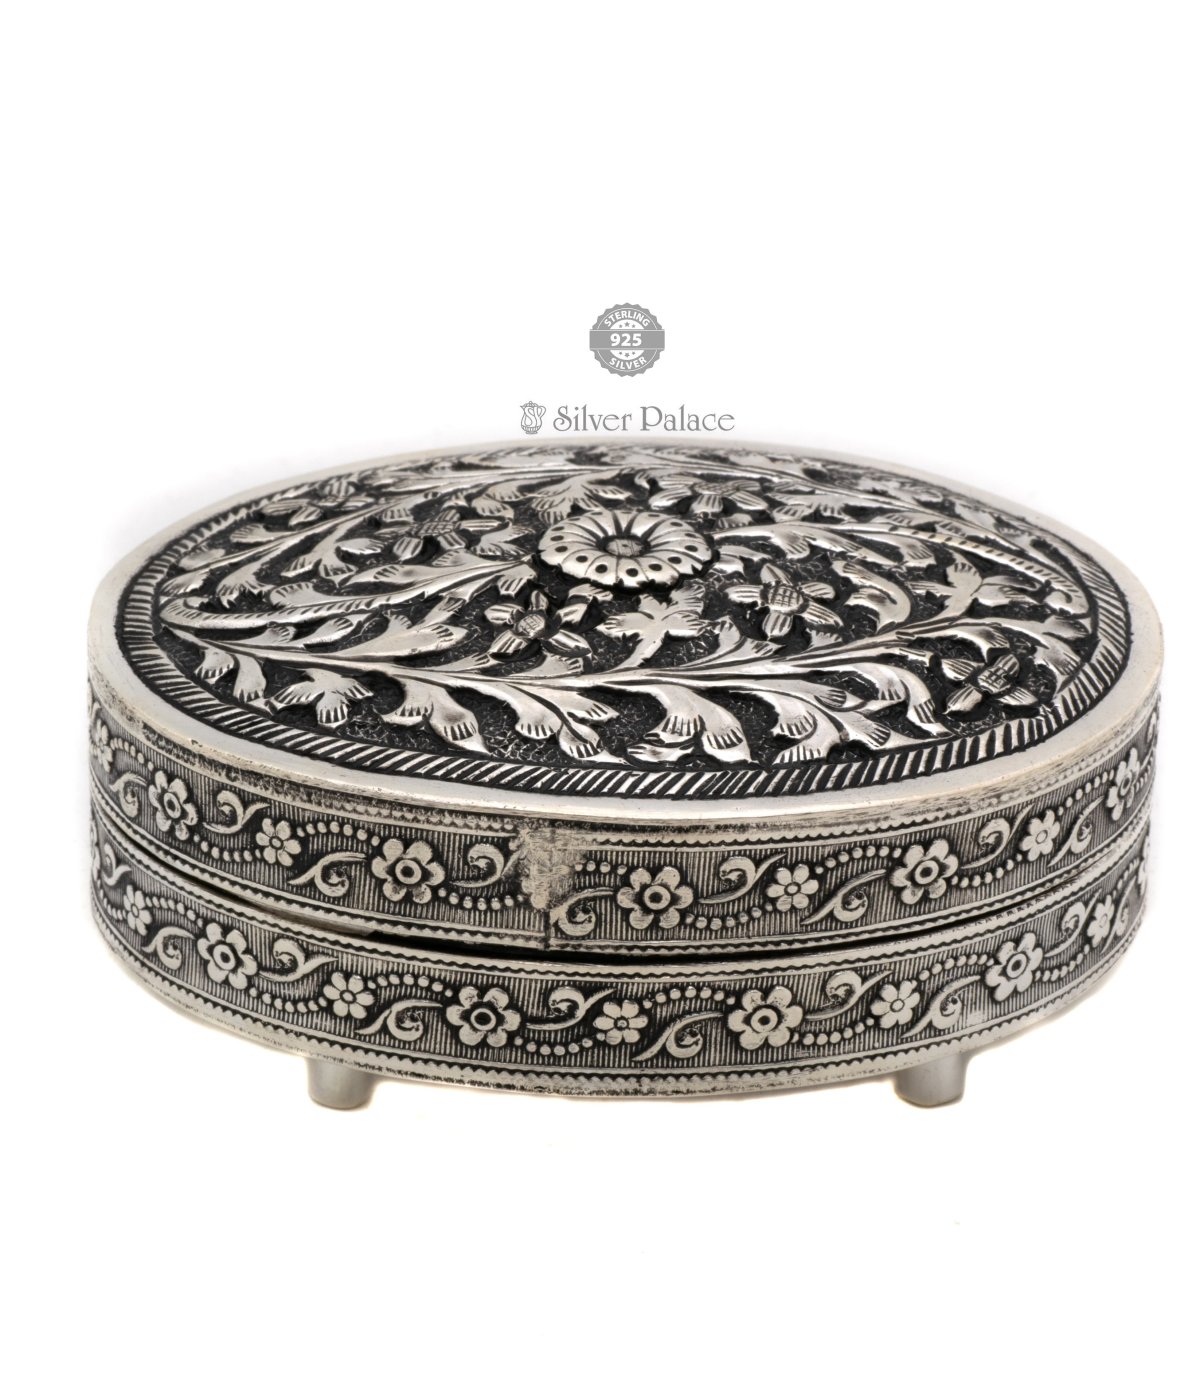 925 sterling silver vintage antic royal design handmade oval soap box for best corporates gift   